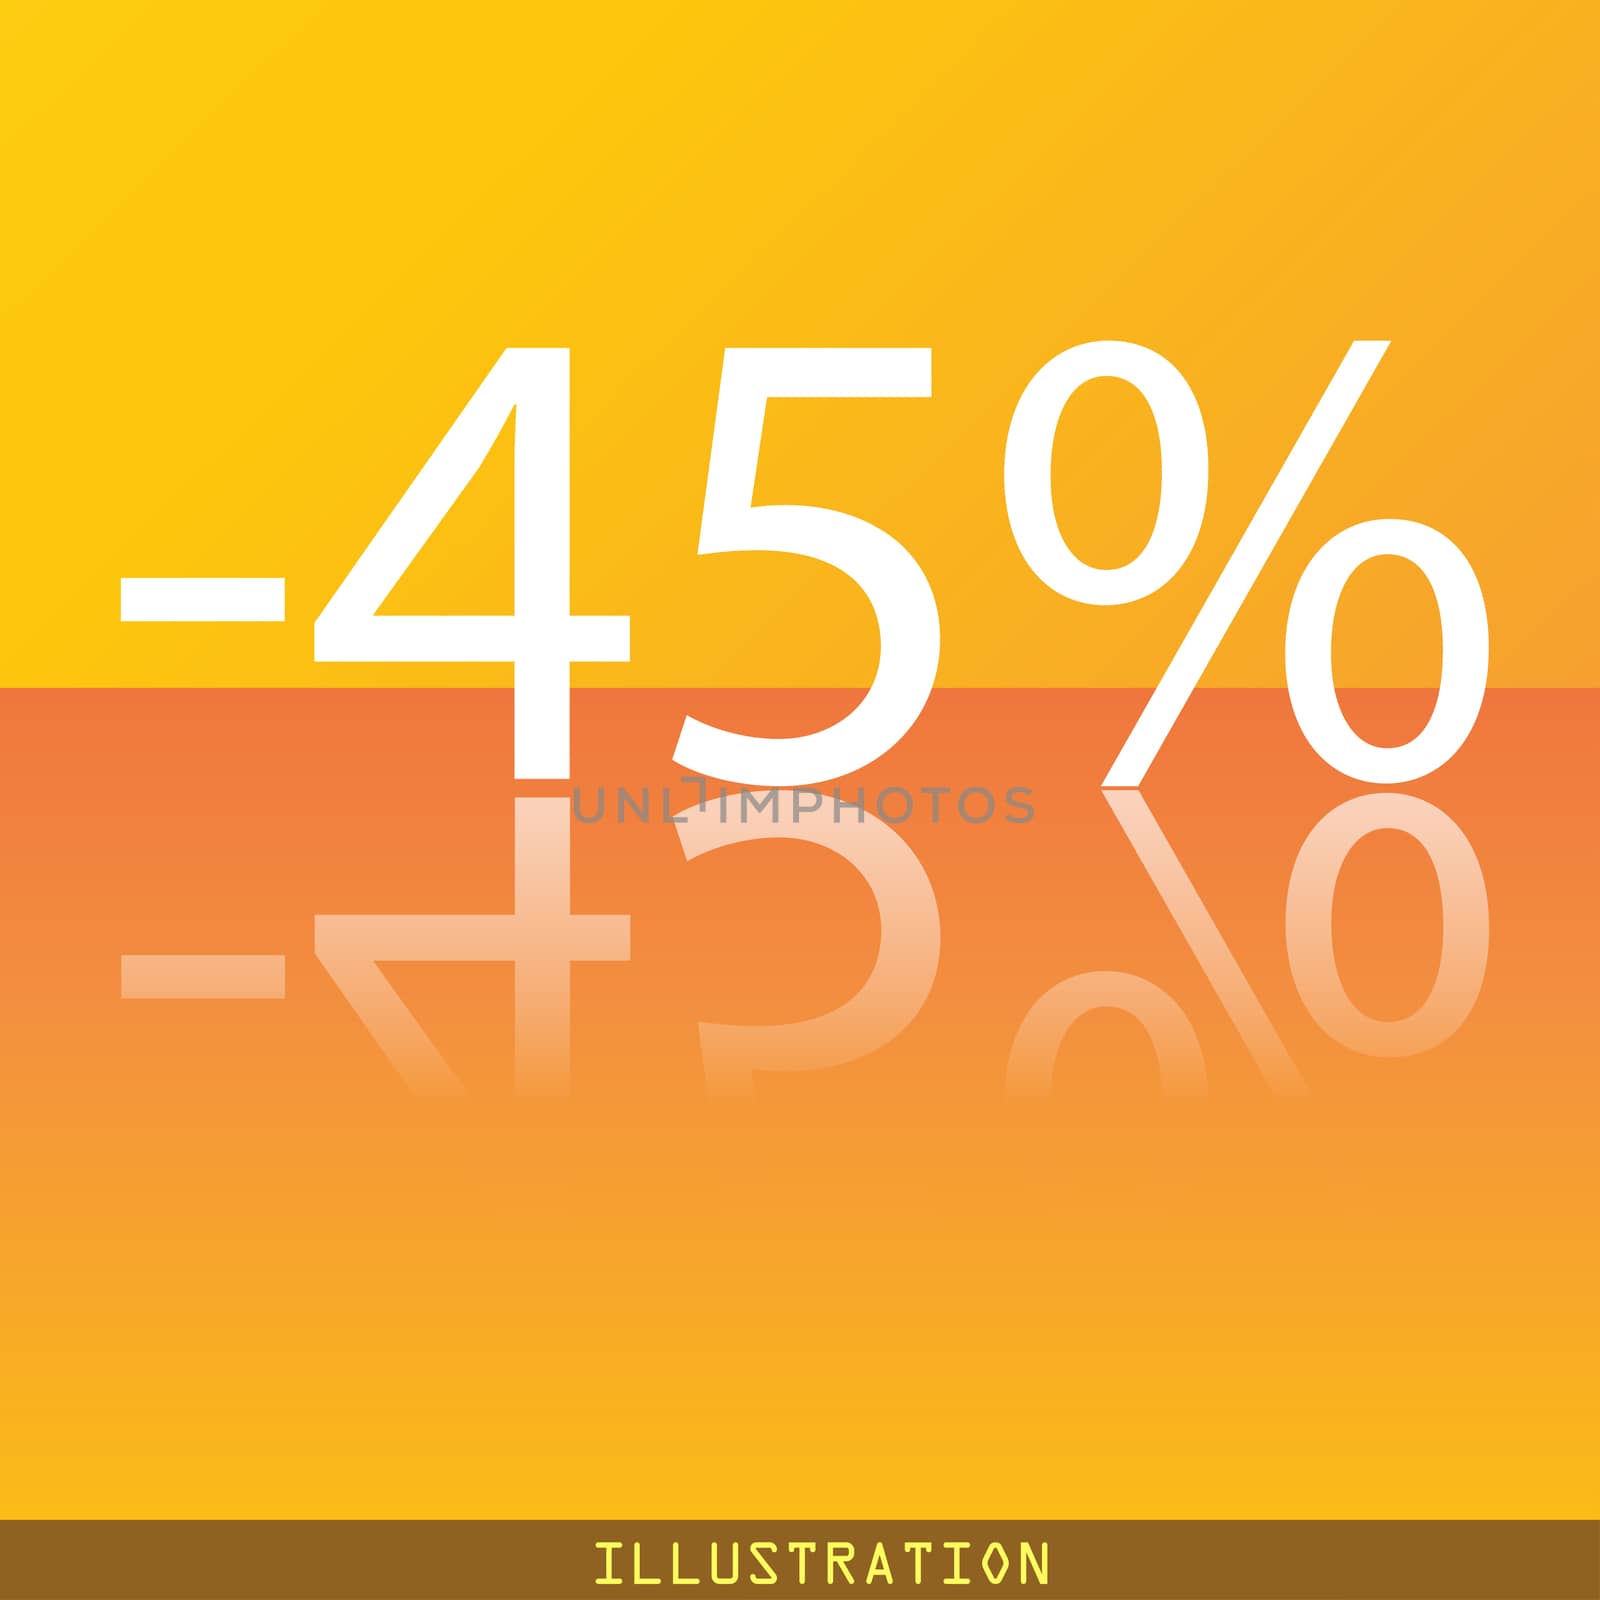 45 percent discount icon symbol Flat modern web design with reflection and space for your text. illustration. Raster version